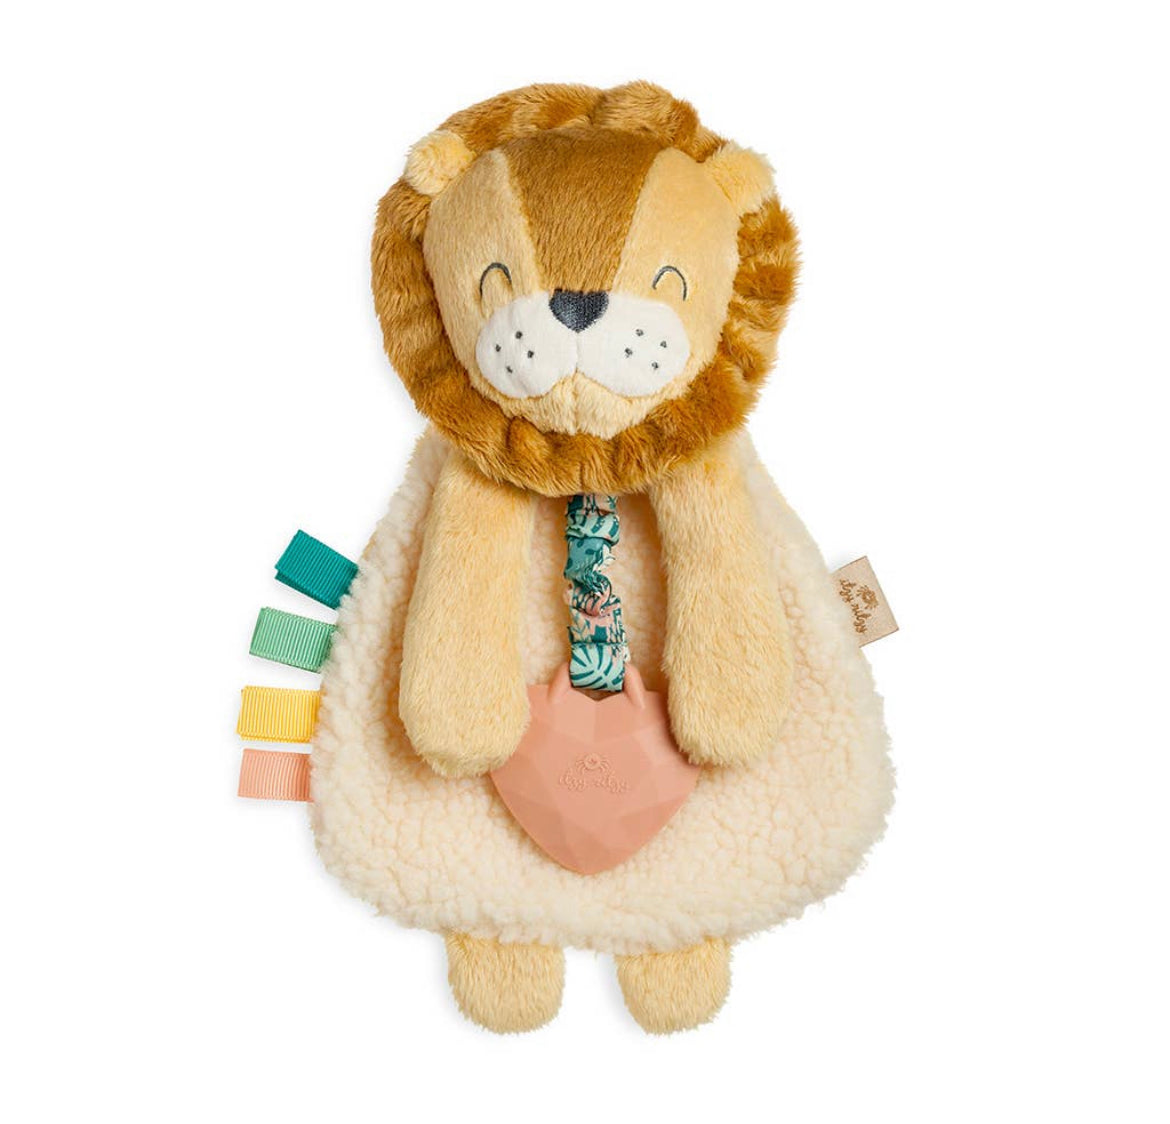 Itzy Ritzy: Itzy Friends Itzy Lovey Plush with Silicone Teether Toy